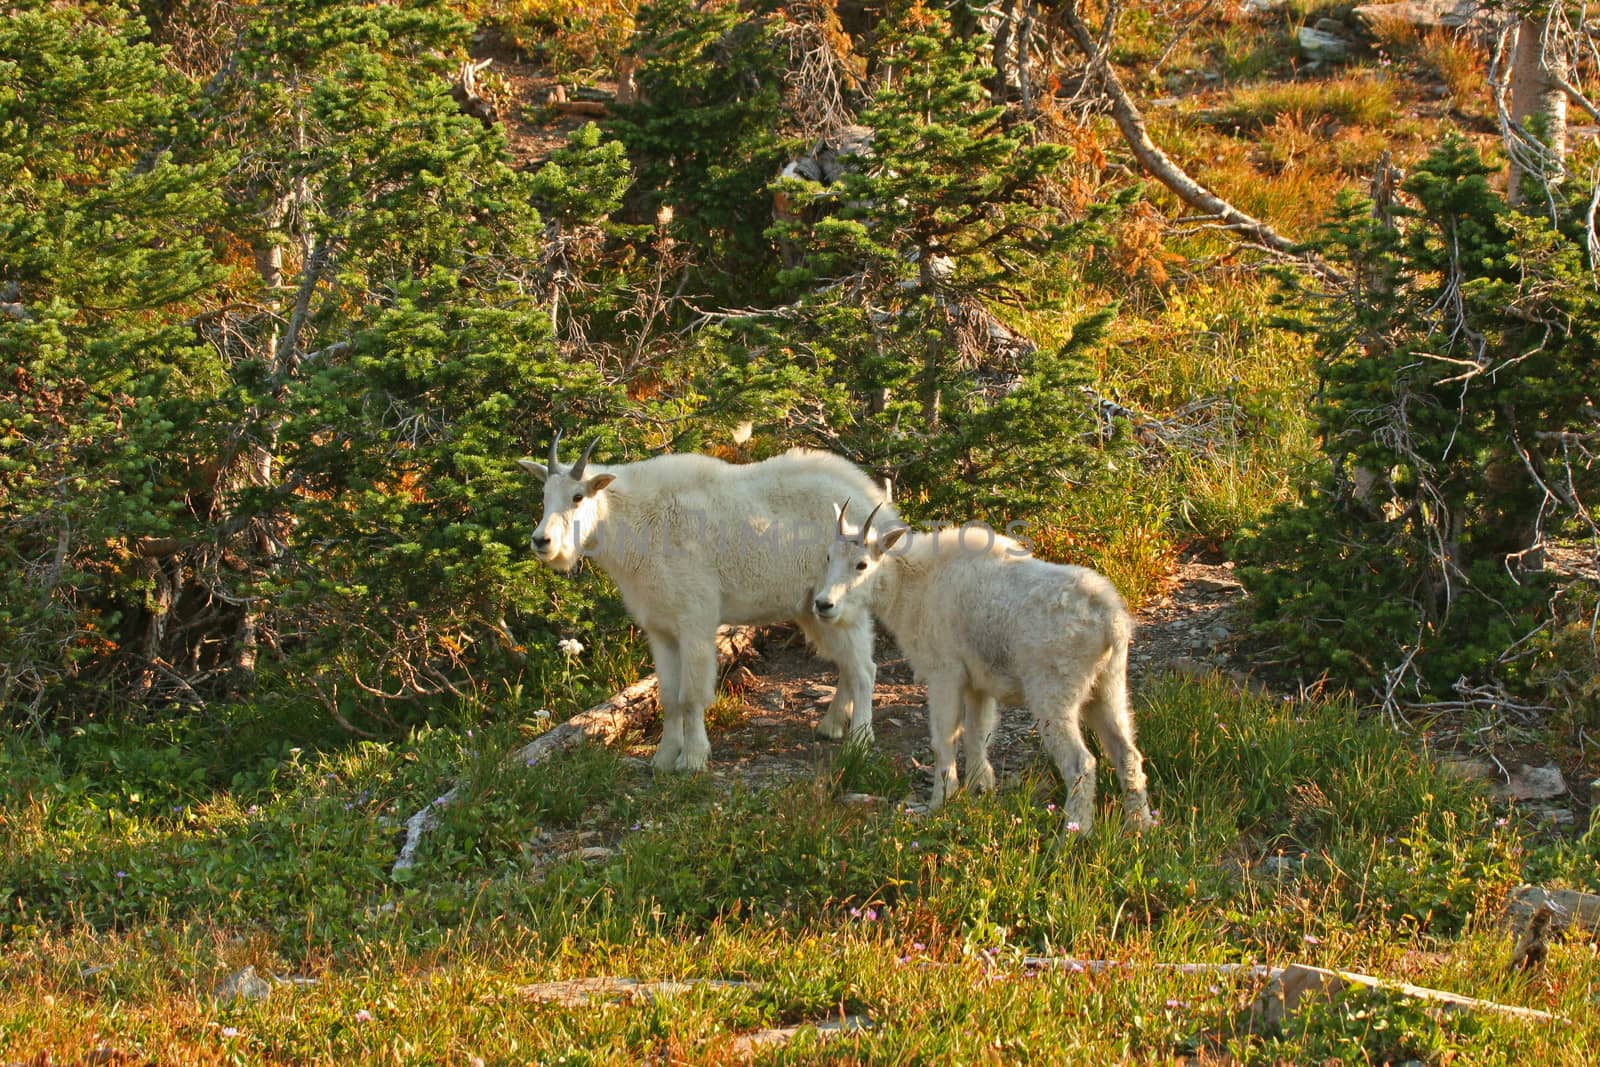 Mountain Goats by LoonChild